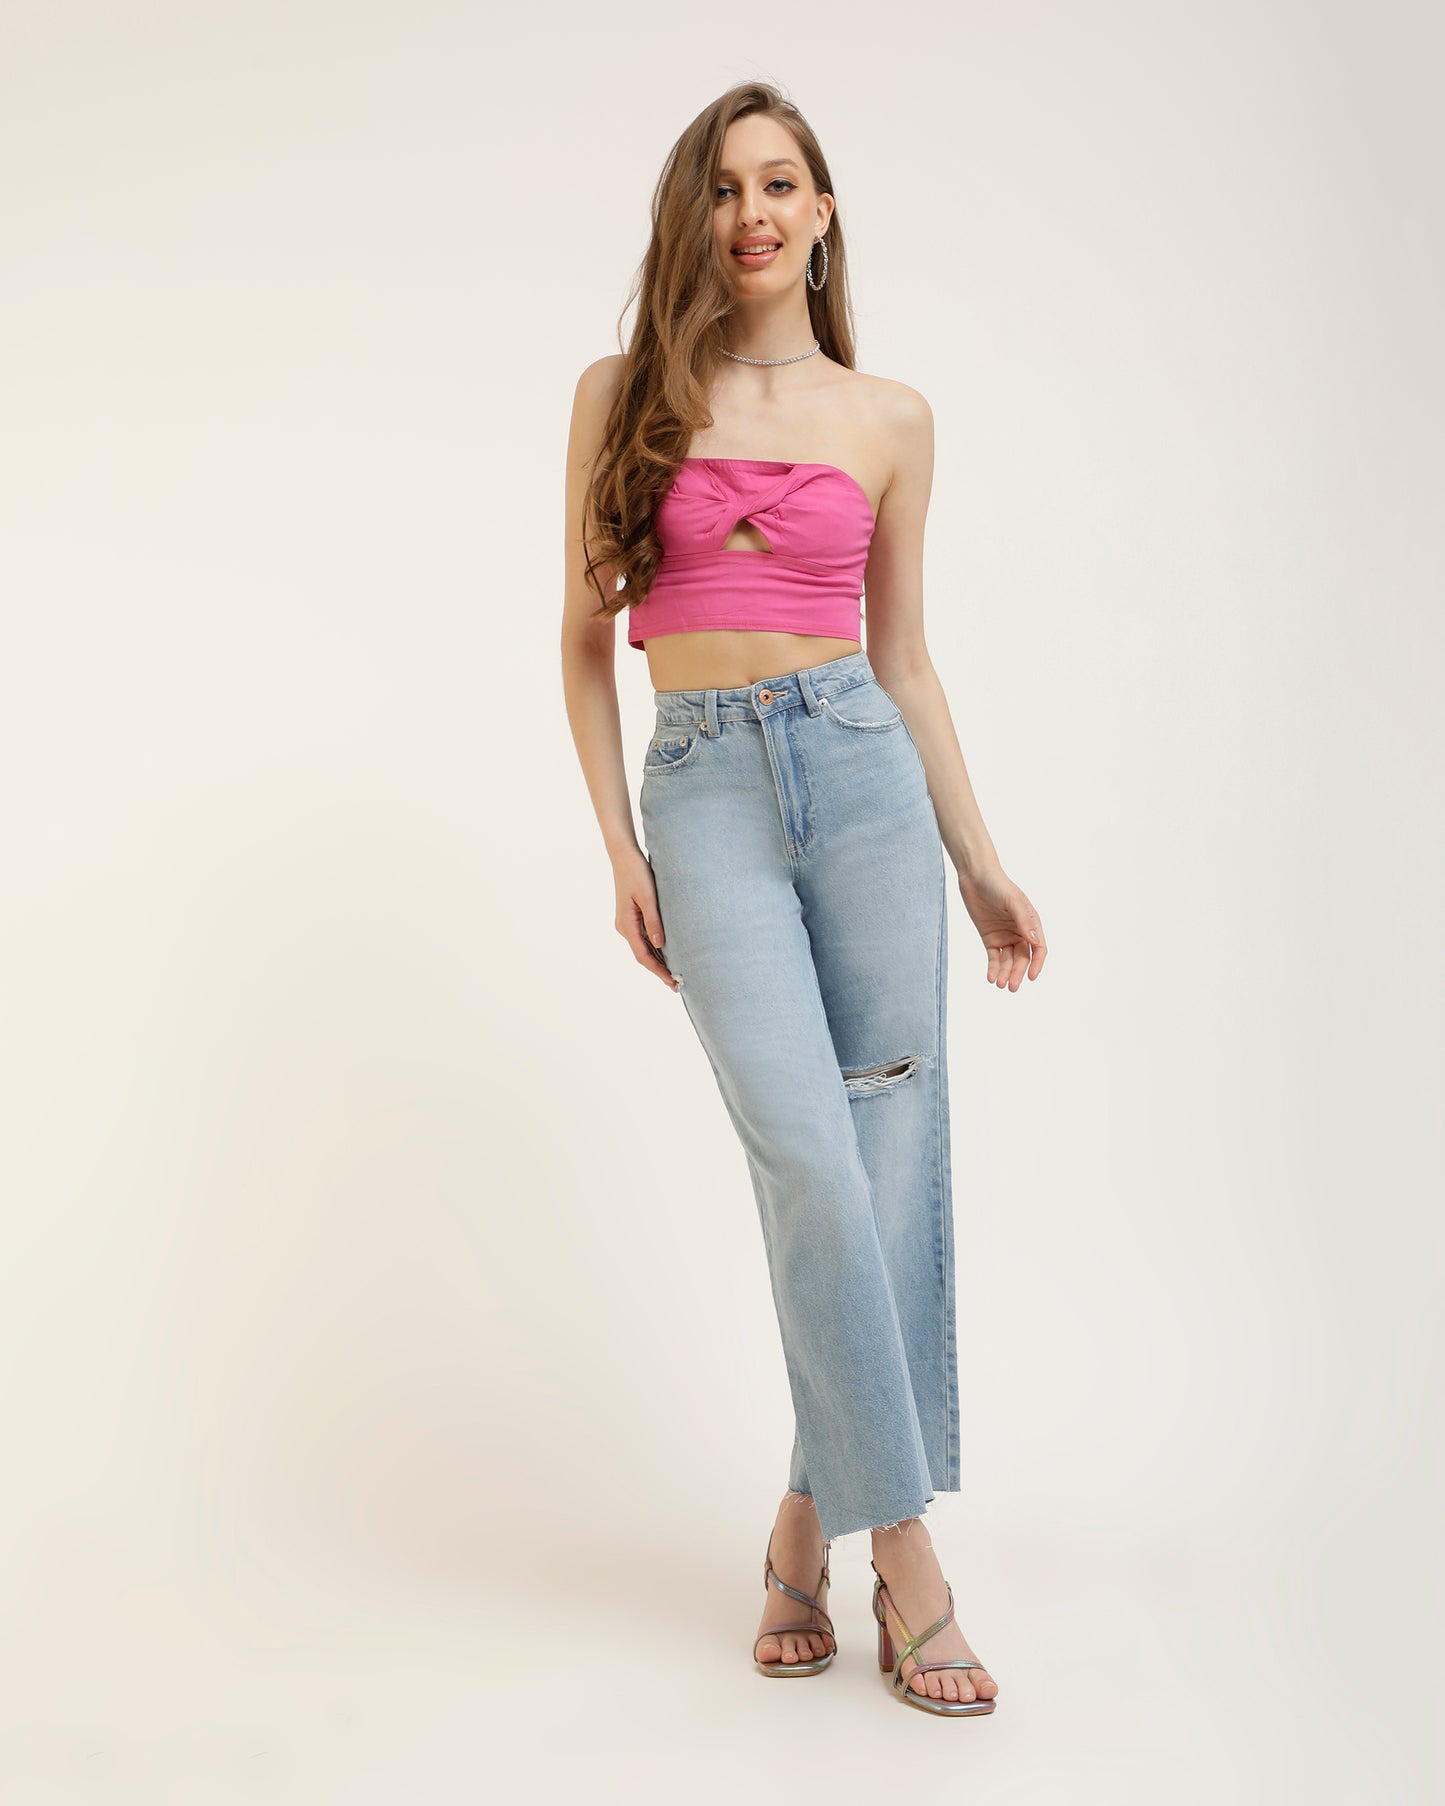 FRONT TWIST BANDEAU TOP,bandeau, casual, cotton, crop, cutout, glam, off shoulder neck, pink, slim fit, solid, streetwear, summer, tops, topwear, twisted, vacation, woven,front-twist-bandeau-top-pink,Color- PinkFabric- Fabric- 97% Cotton 3% ElastaneType- Bandeau Fit- Slim Fit Length- CropNeck- Off ShoulderClosure- Zip Print- SolidDetails- Cut out and twisted fabric detail